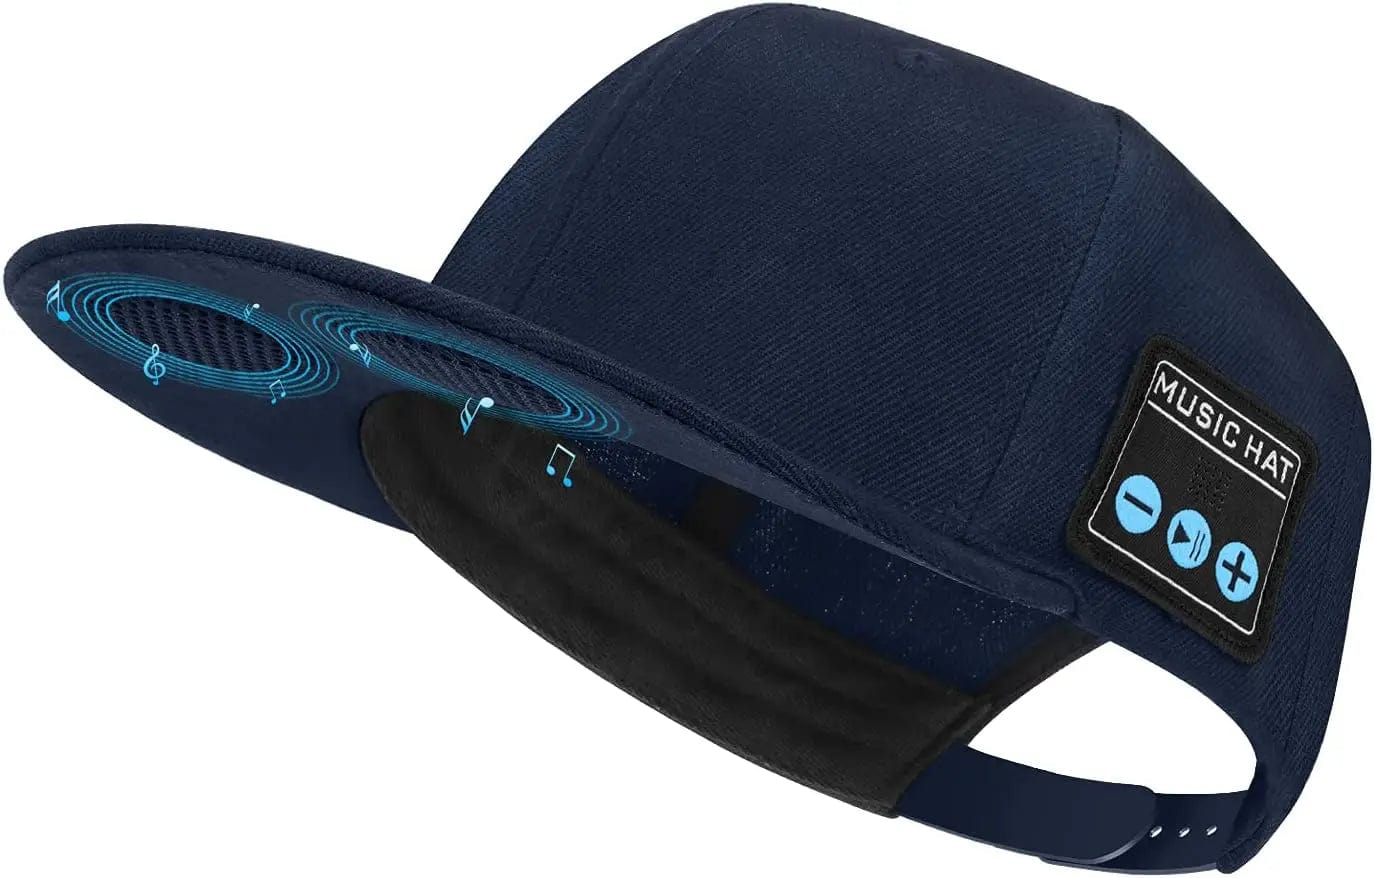 HomeBound Essentials Blue / CHINA Bluetooth Speaker Baseball Cap - Adjustable Hat with Mic for Wireless Music and Calls